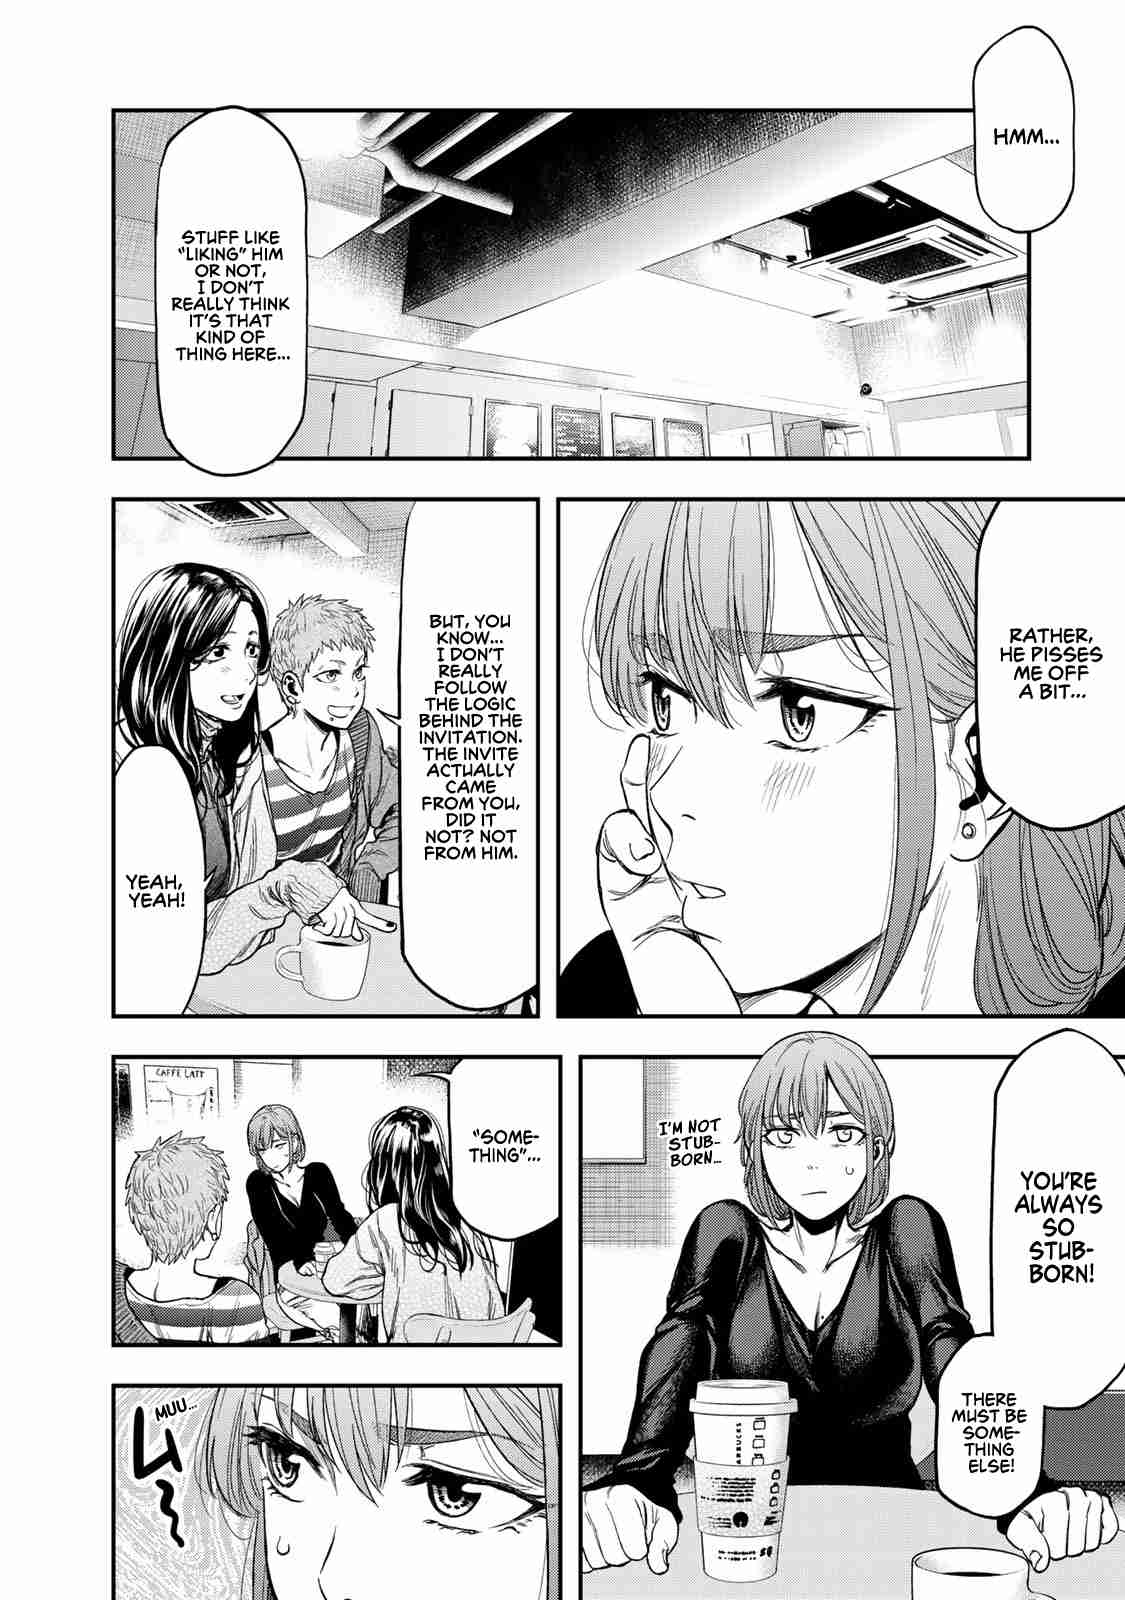 Futari Solo Camp Vol. 1 Ch. 3 I can't take it anymore, geez!